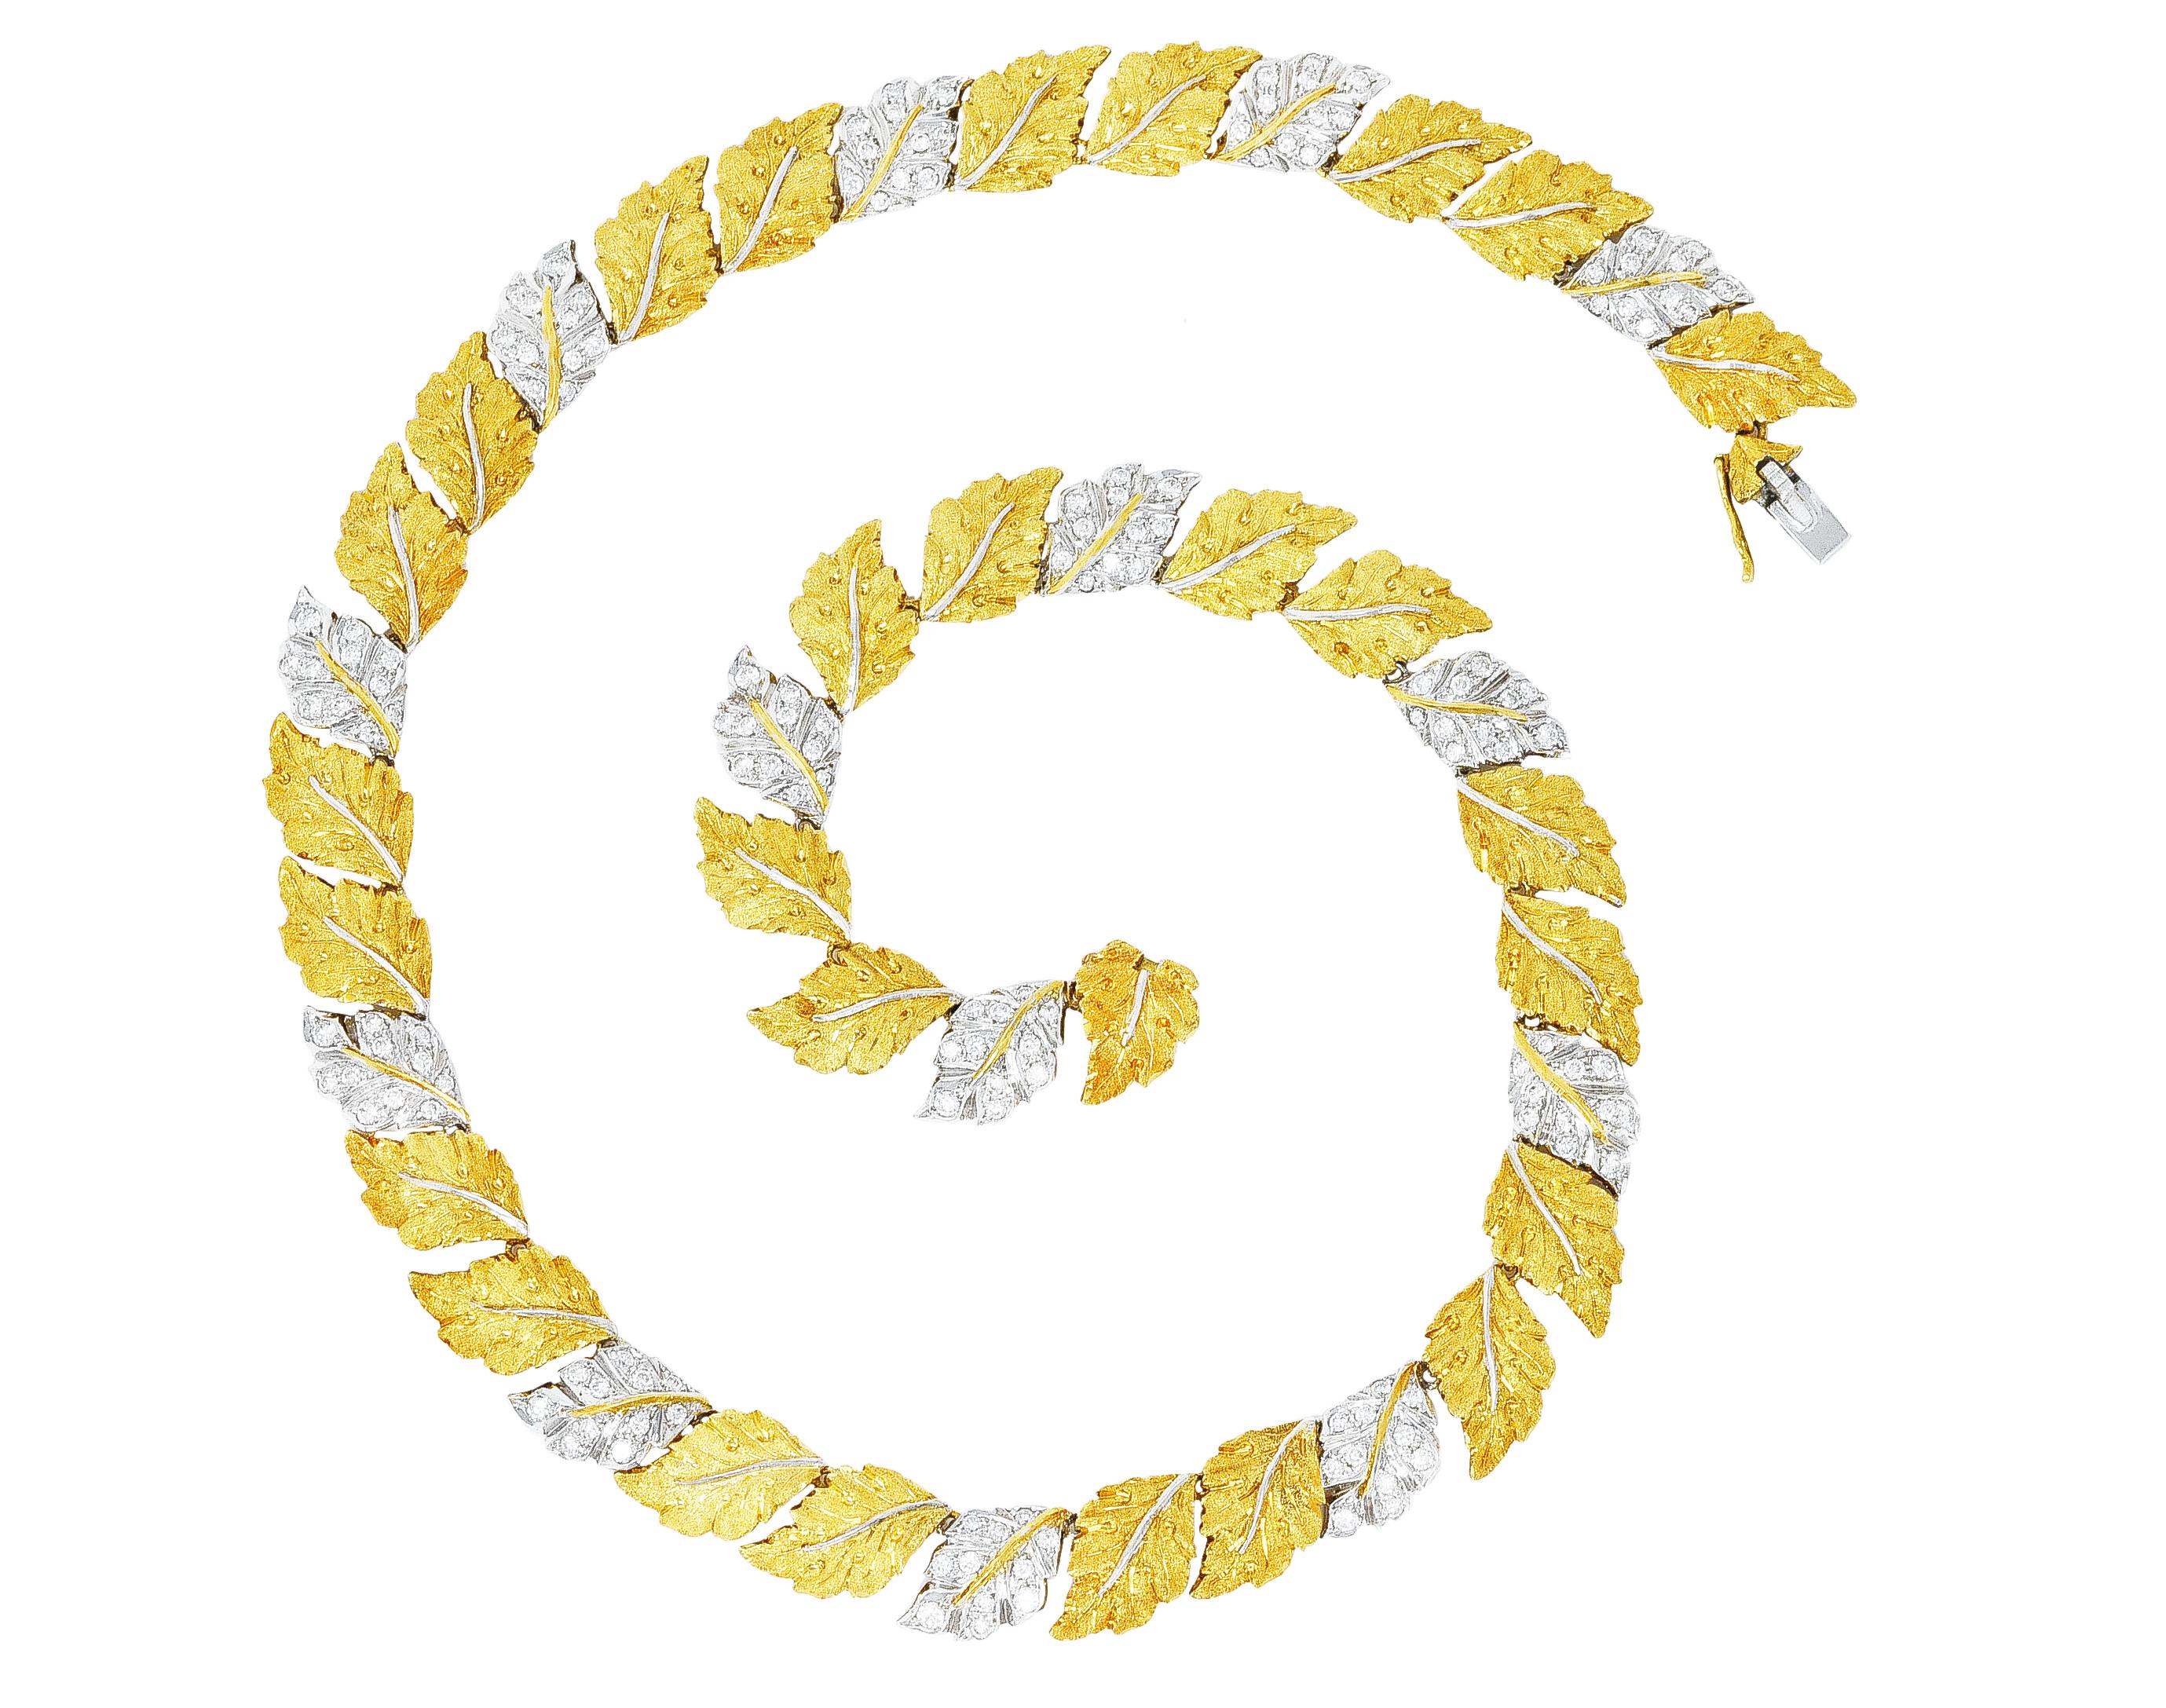 Necklace is designed as a garland of birch leaves in a pattern of alternating two-tone gold. Featuring round brilliant cut diamonds bead set in white gold leaves. Weighing approximately 3.08 carats total - G/H in color with VS2 clarity.
With fine